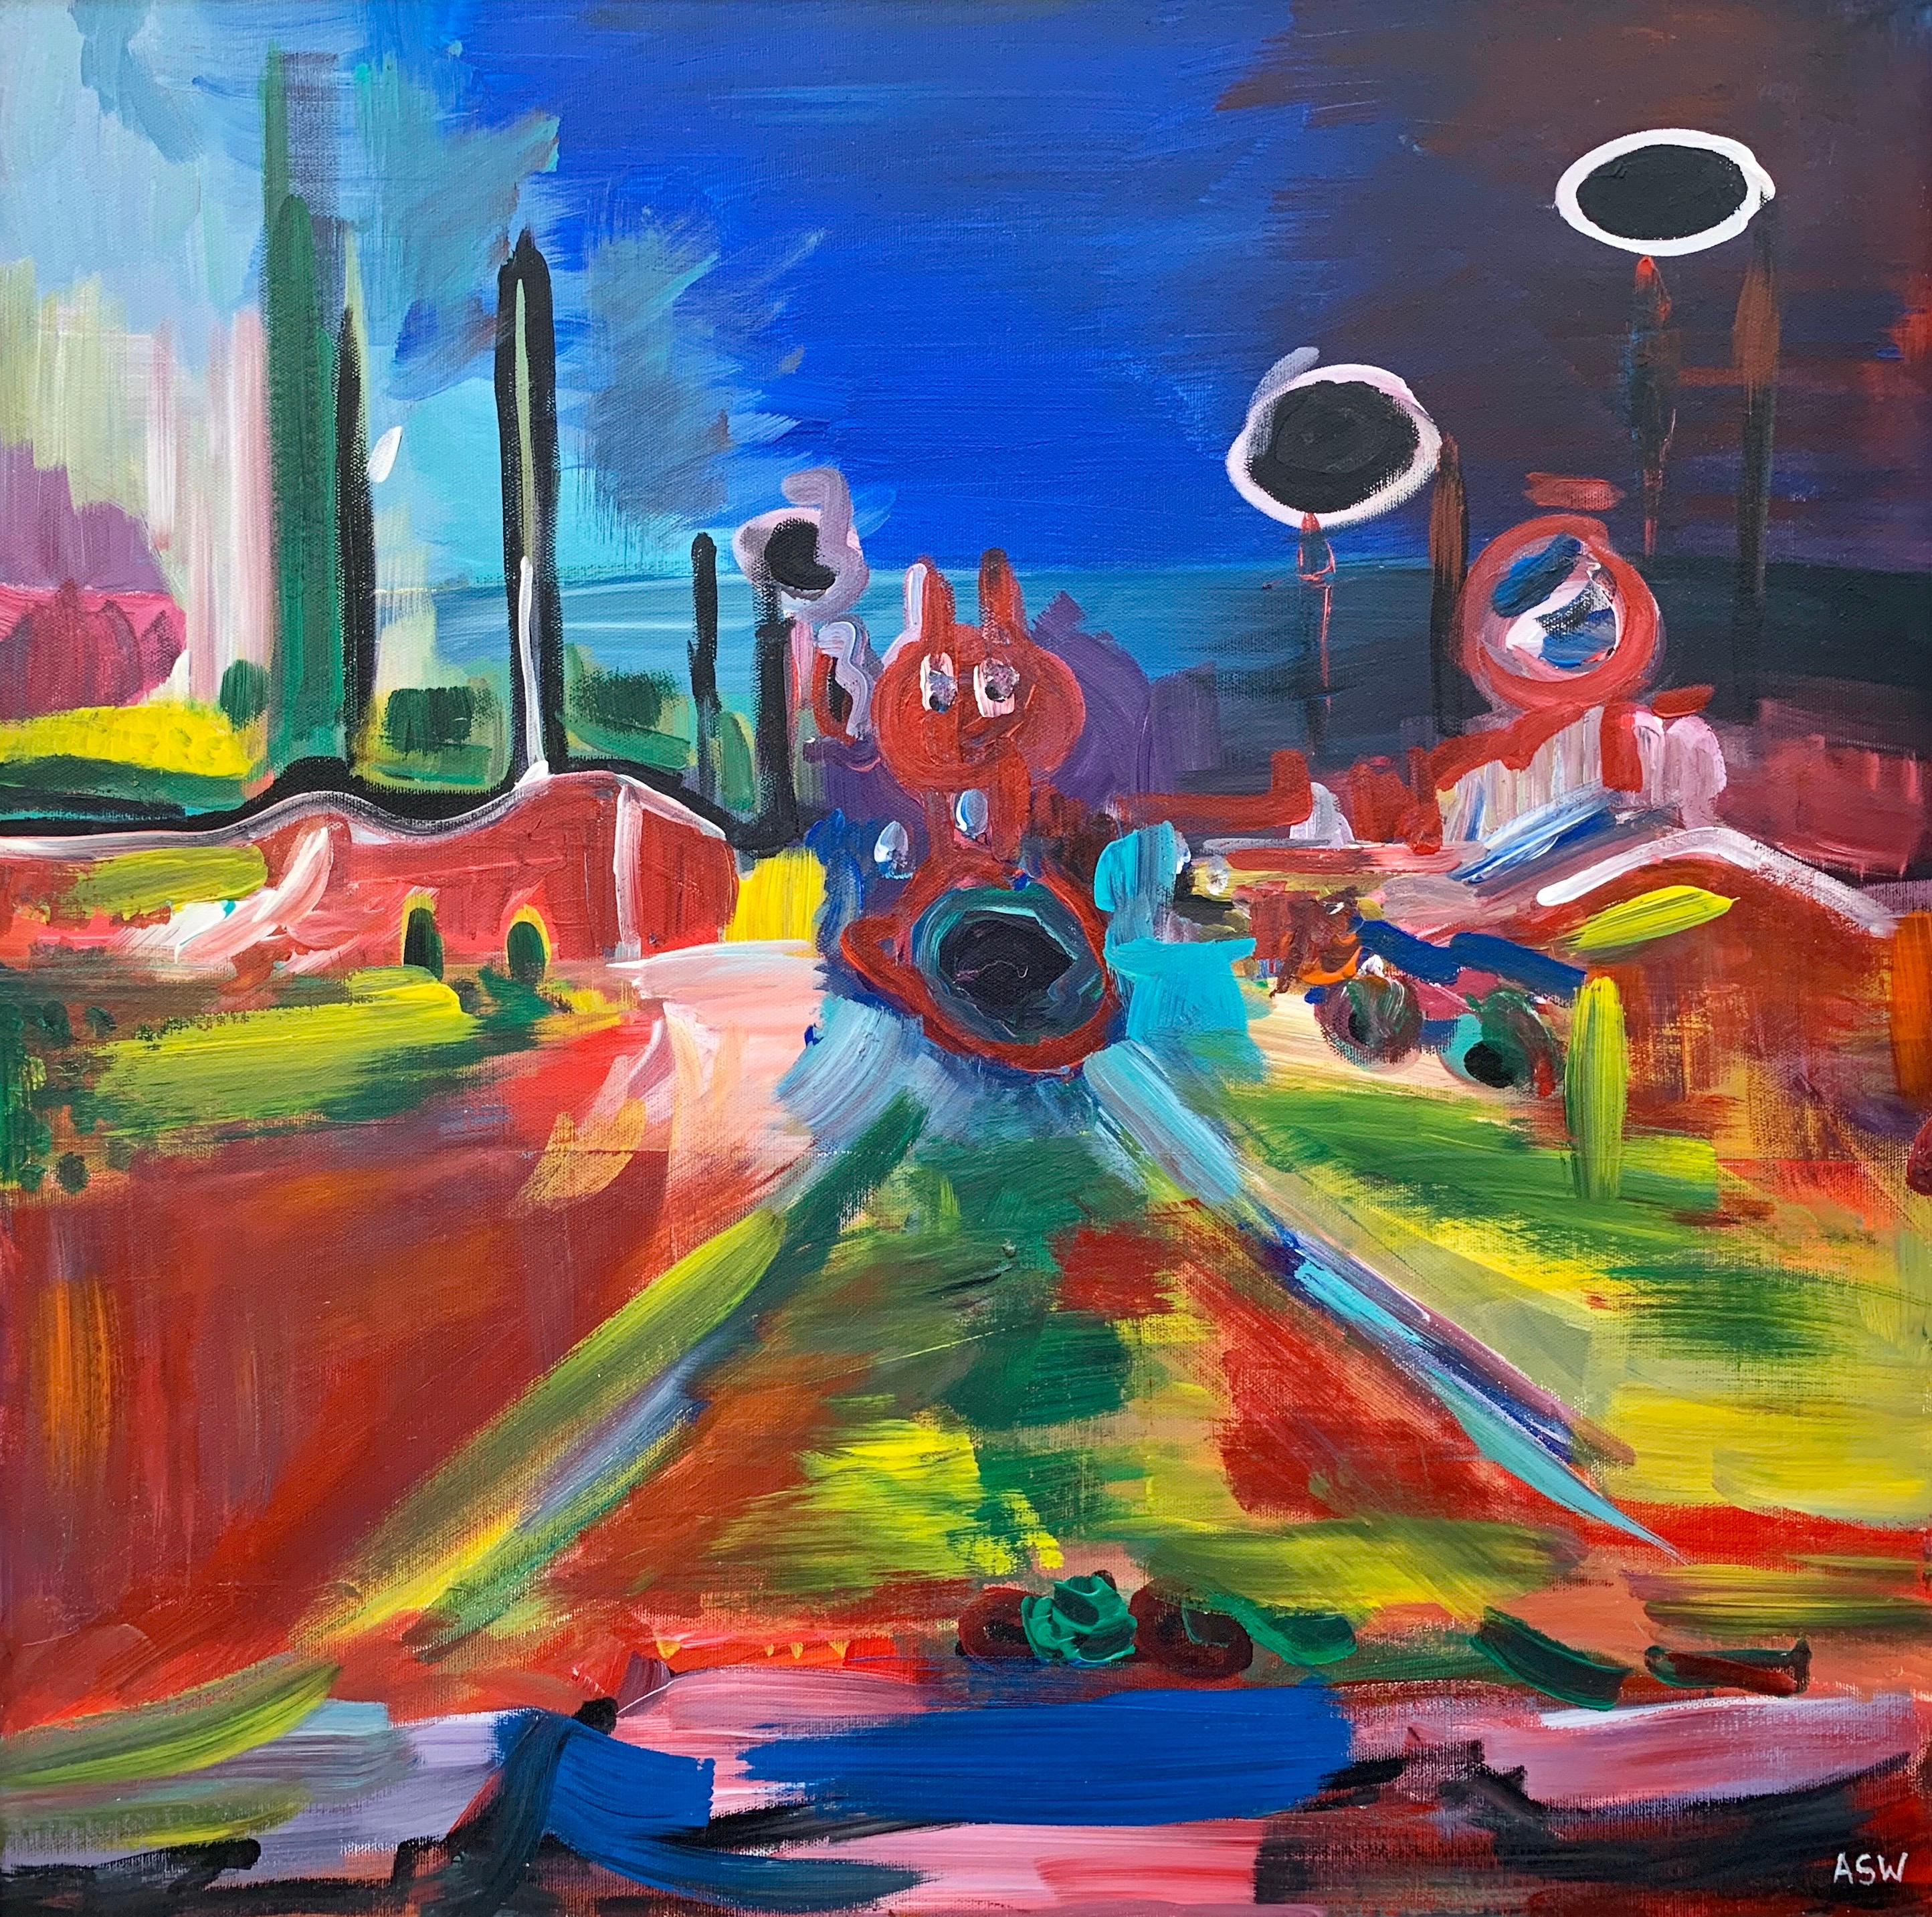 Psychedelic Abstract Landscape Painting of Urban City Scene by British Artist 3